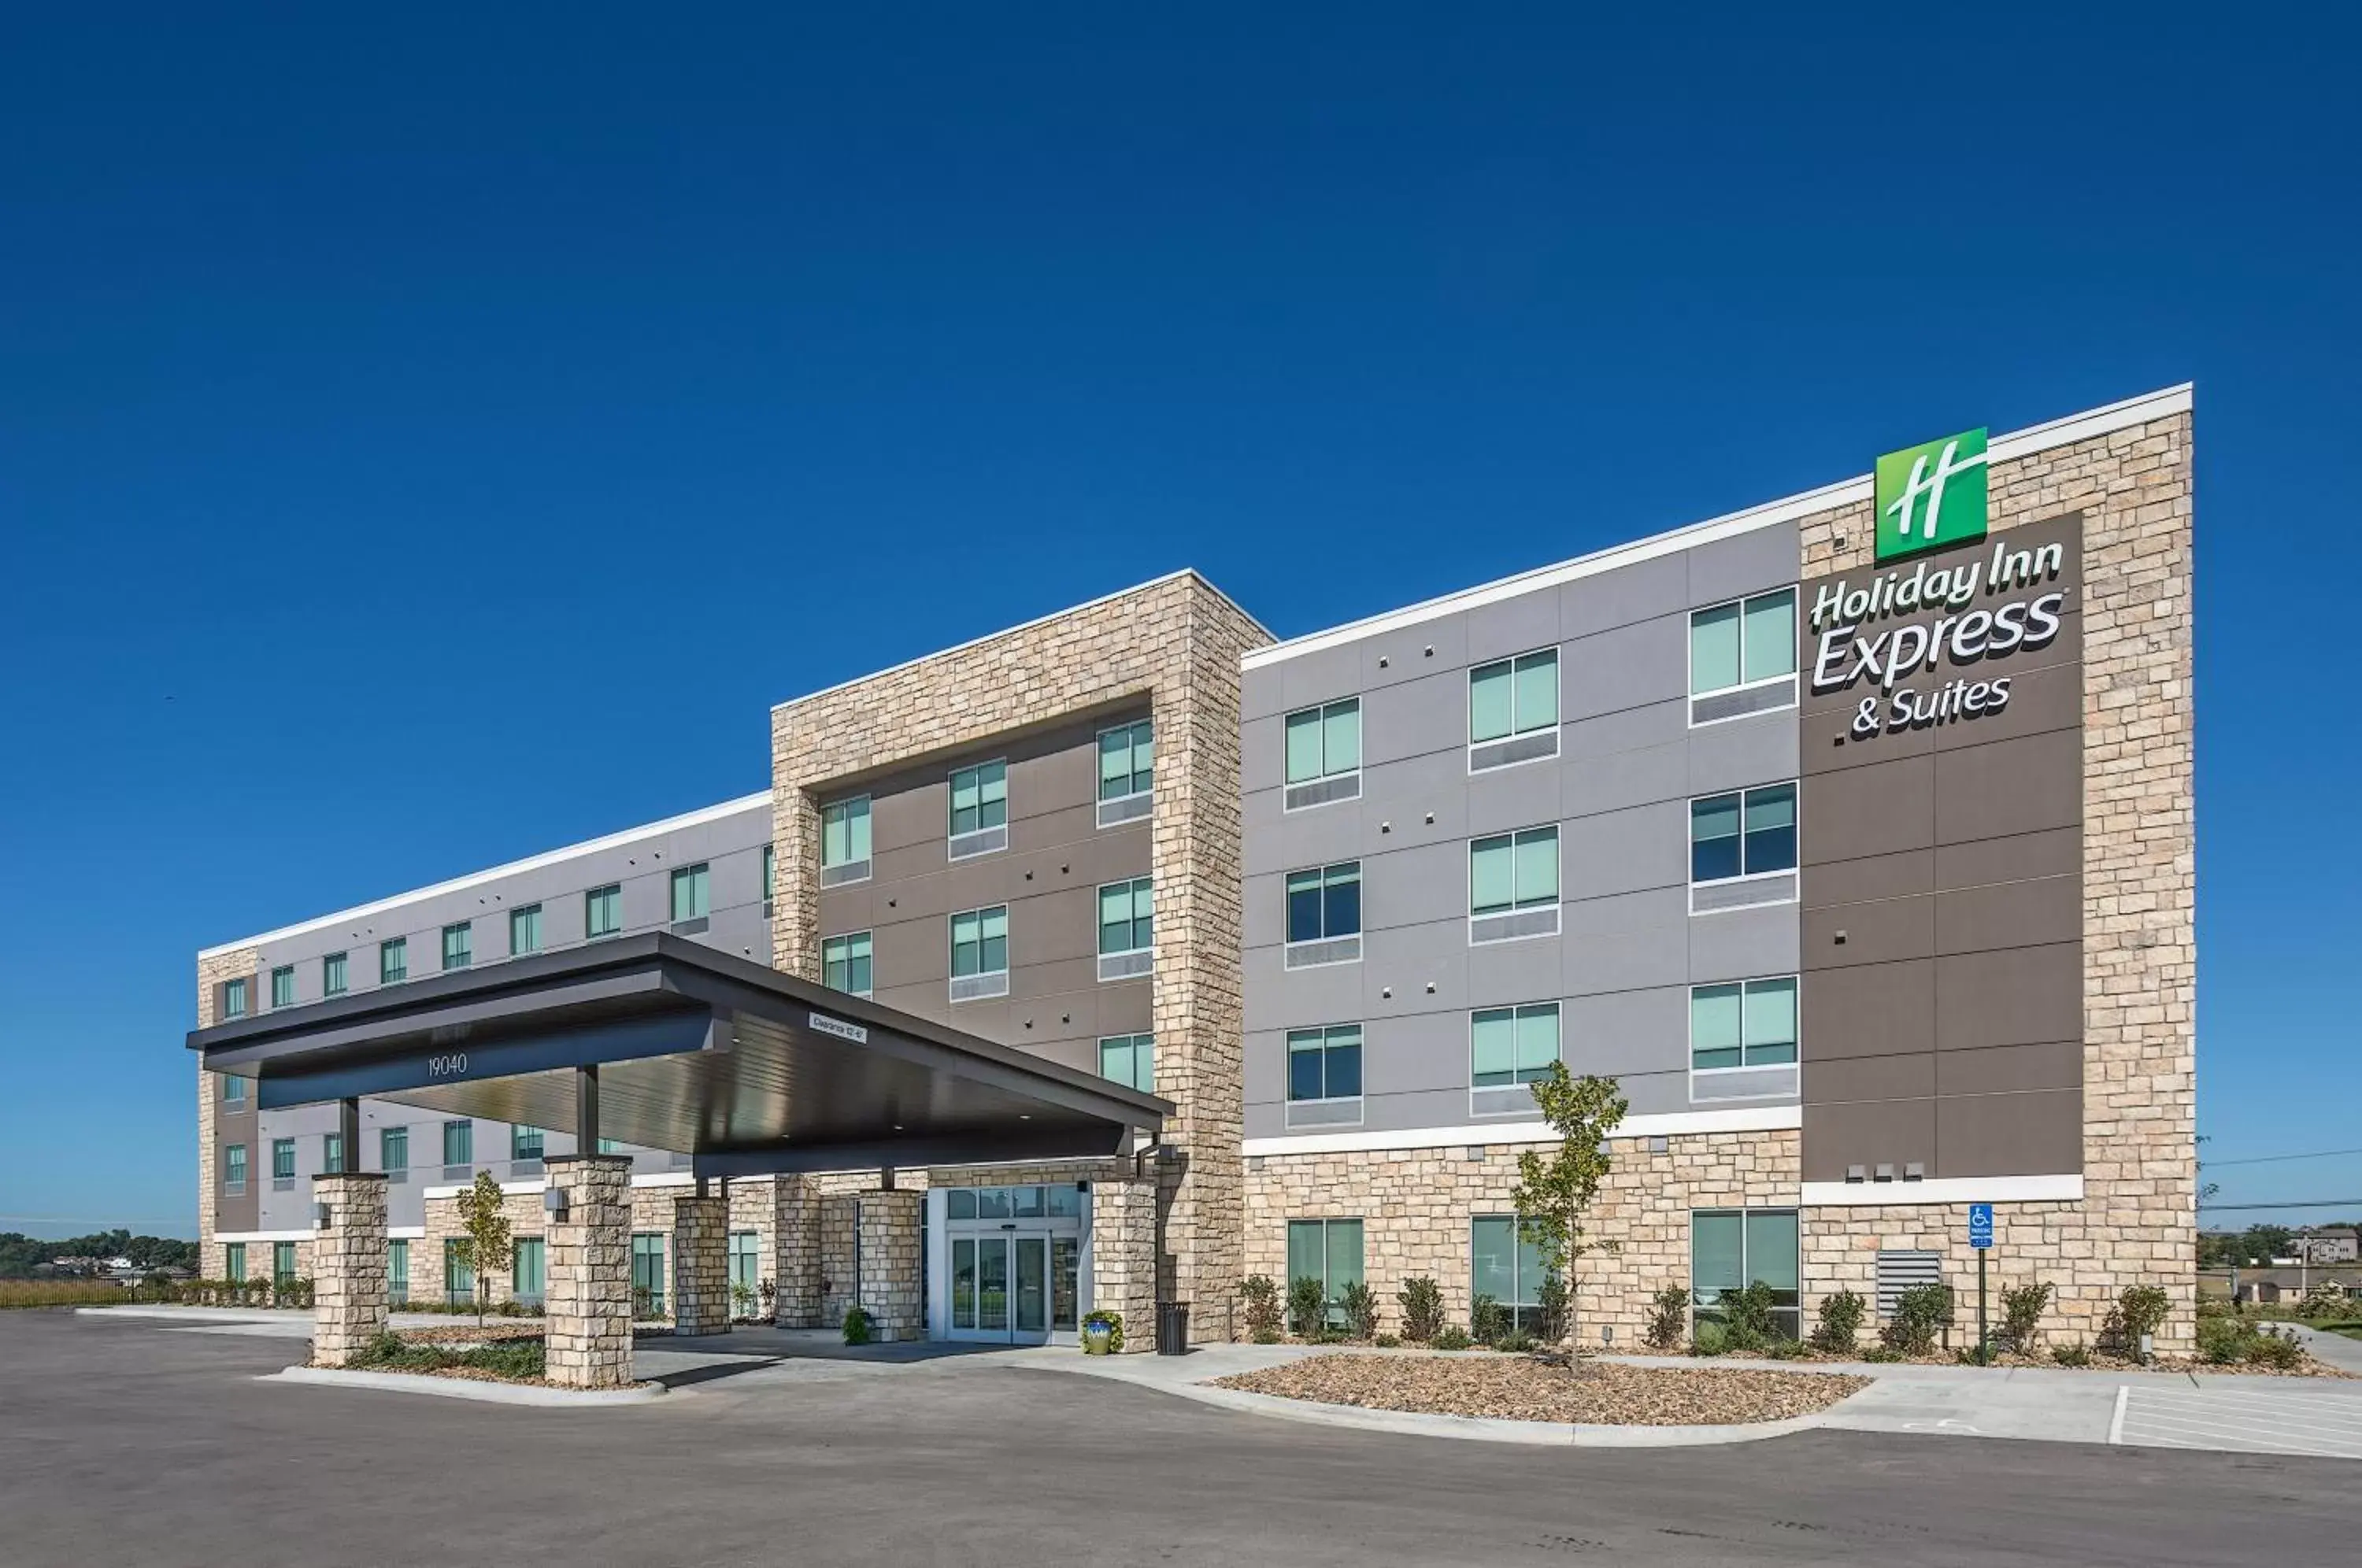 Property building in Holiday Inn Express & Suites - West Omaha - Elkhorn, an IHG Hotel